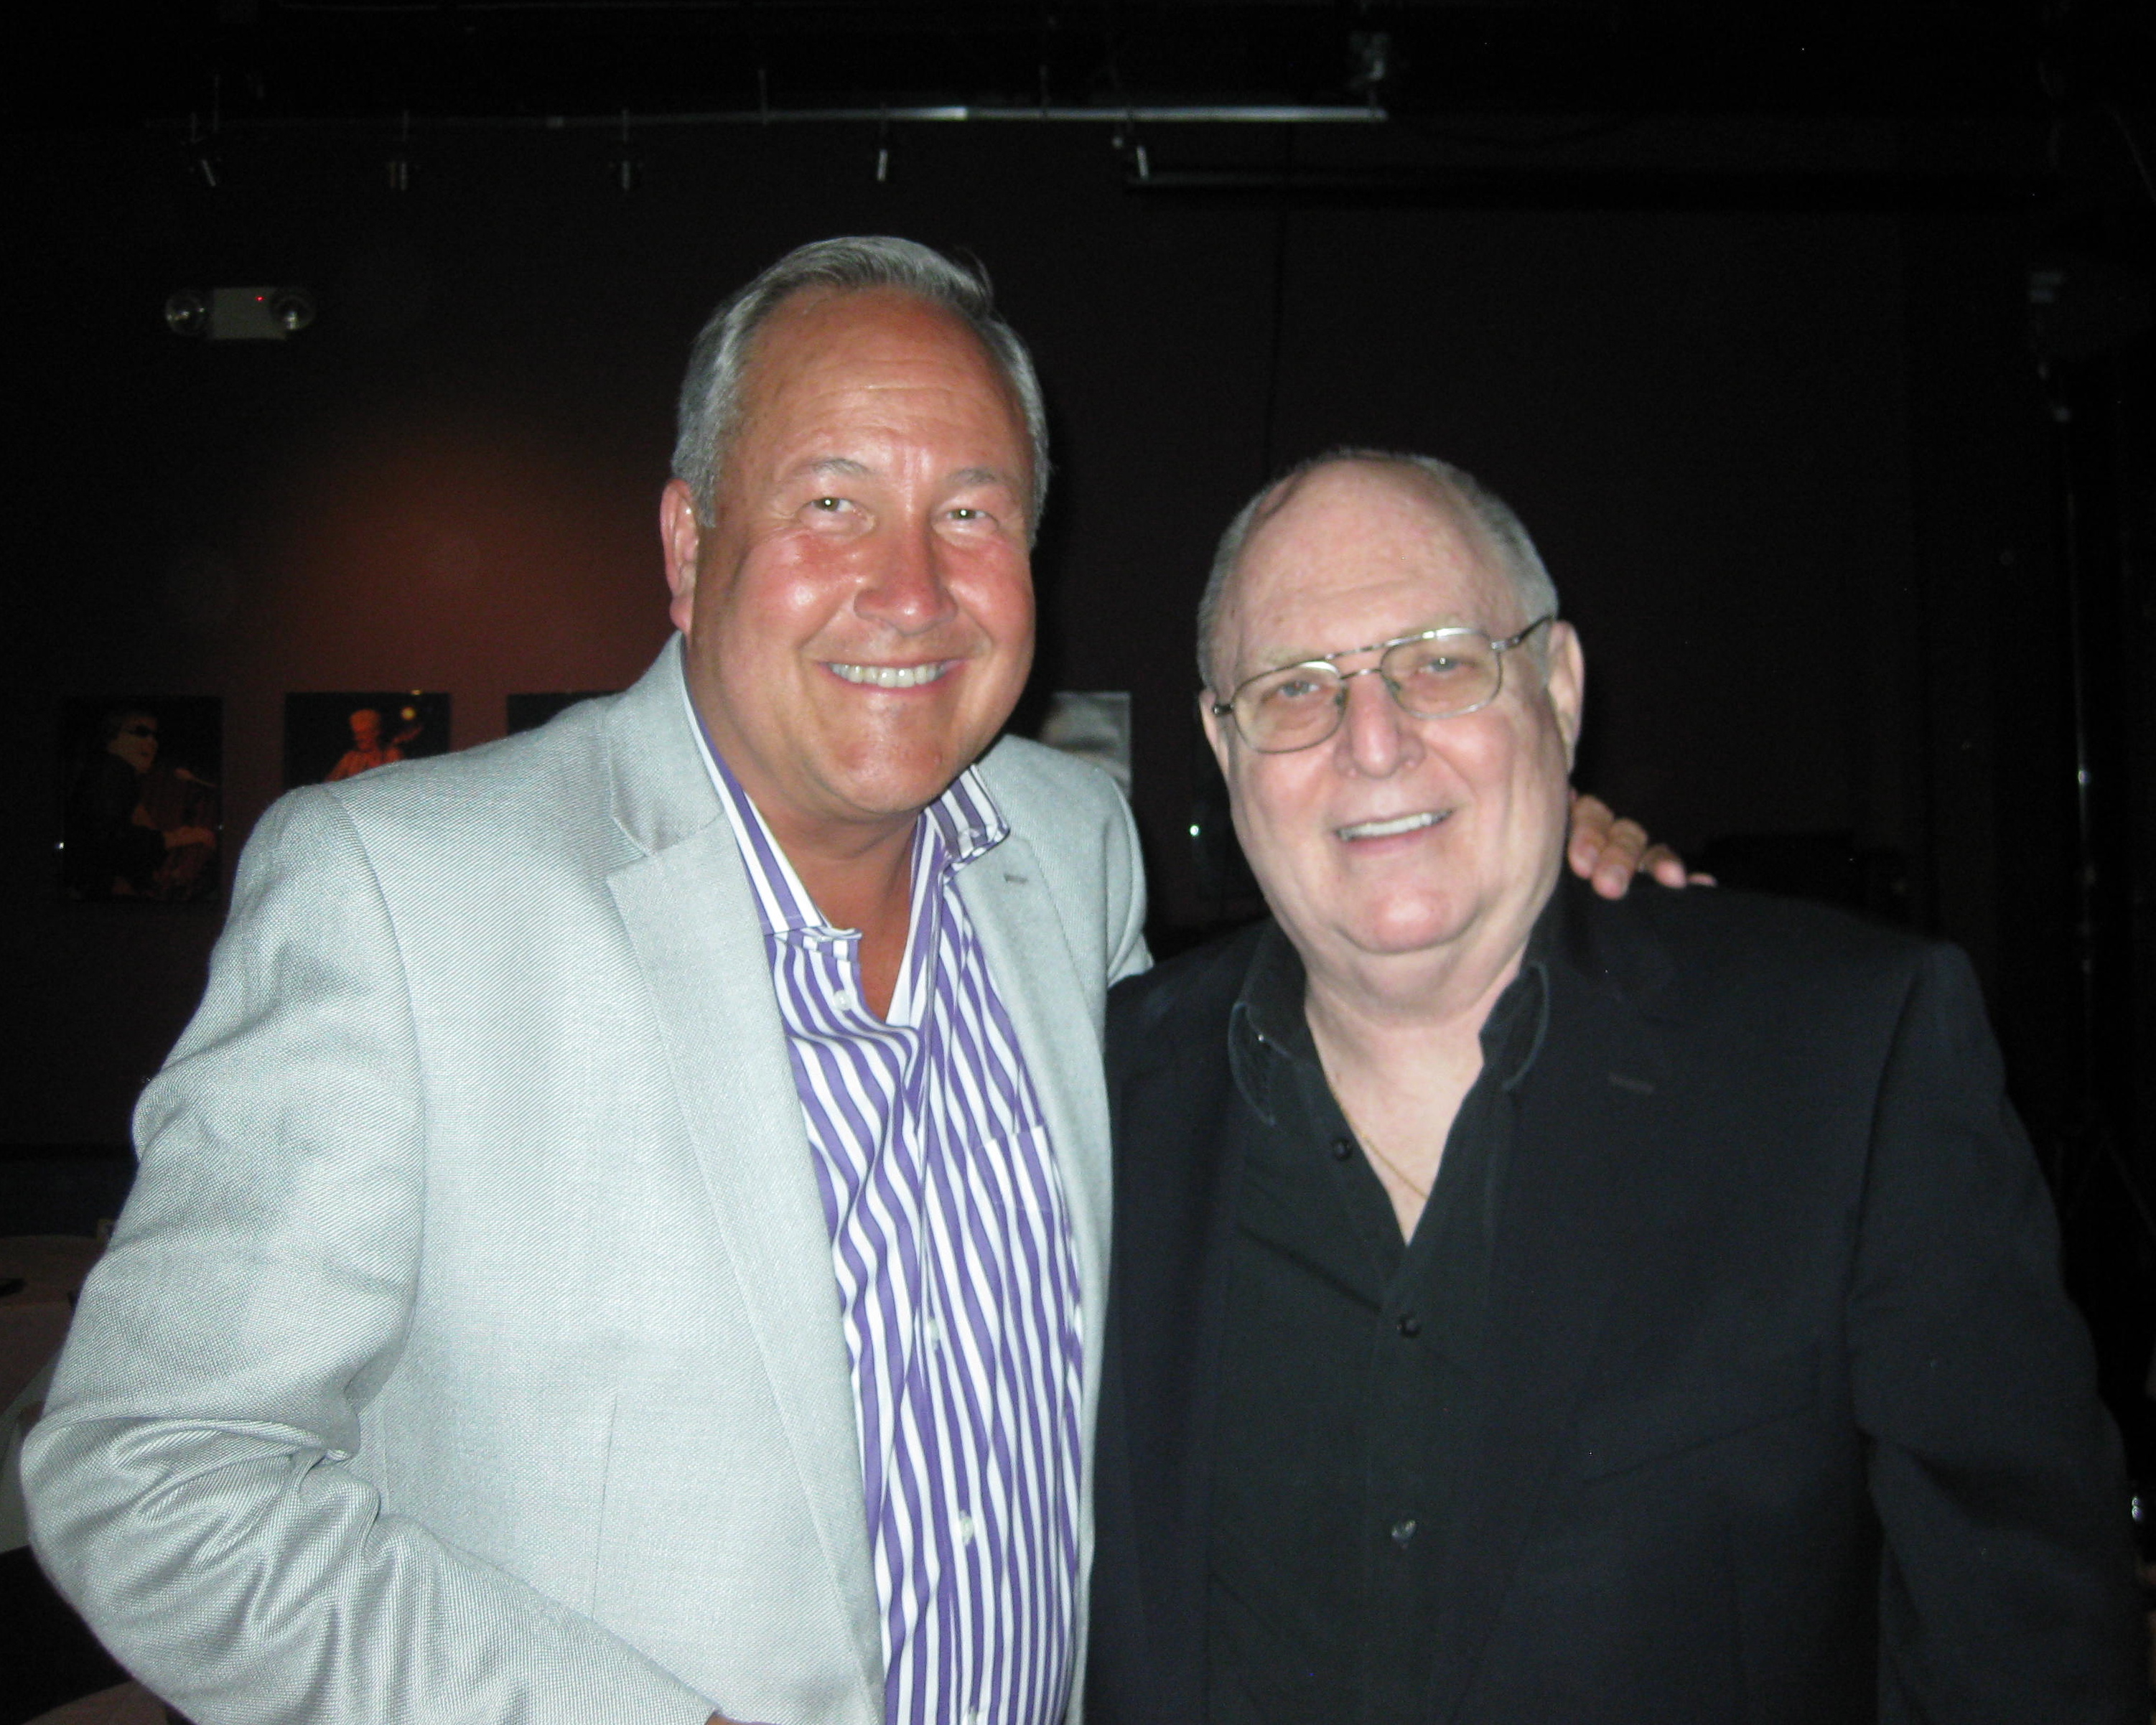 Mike Wargo with Billy Vera at Catalina's Jazz Club in Hollywood (June 2013).